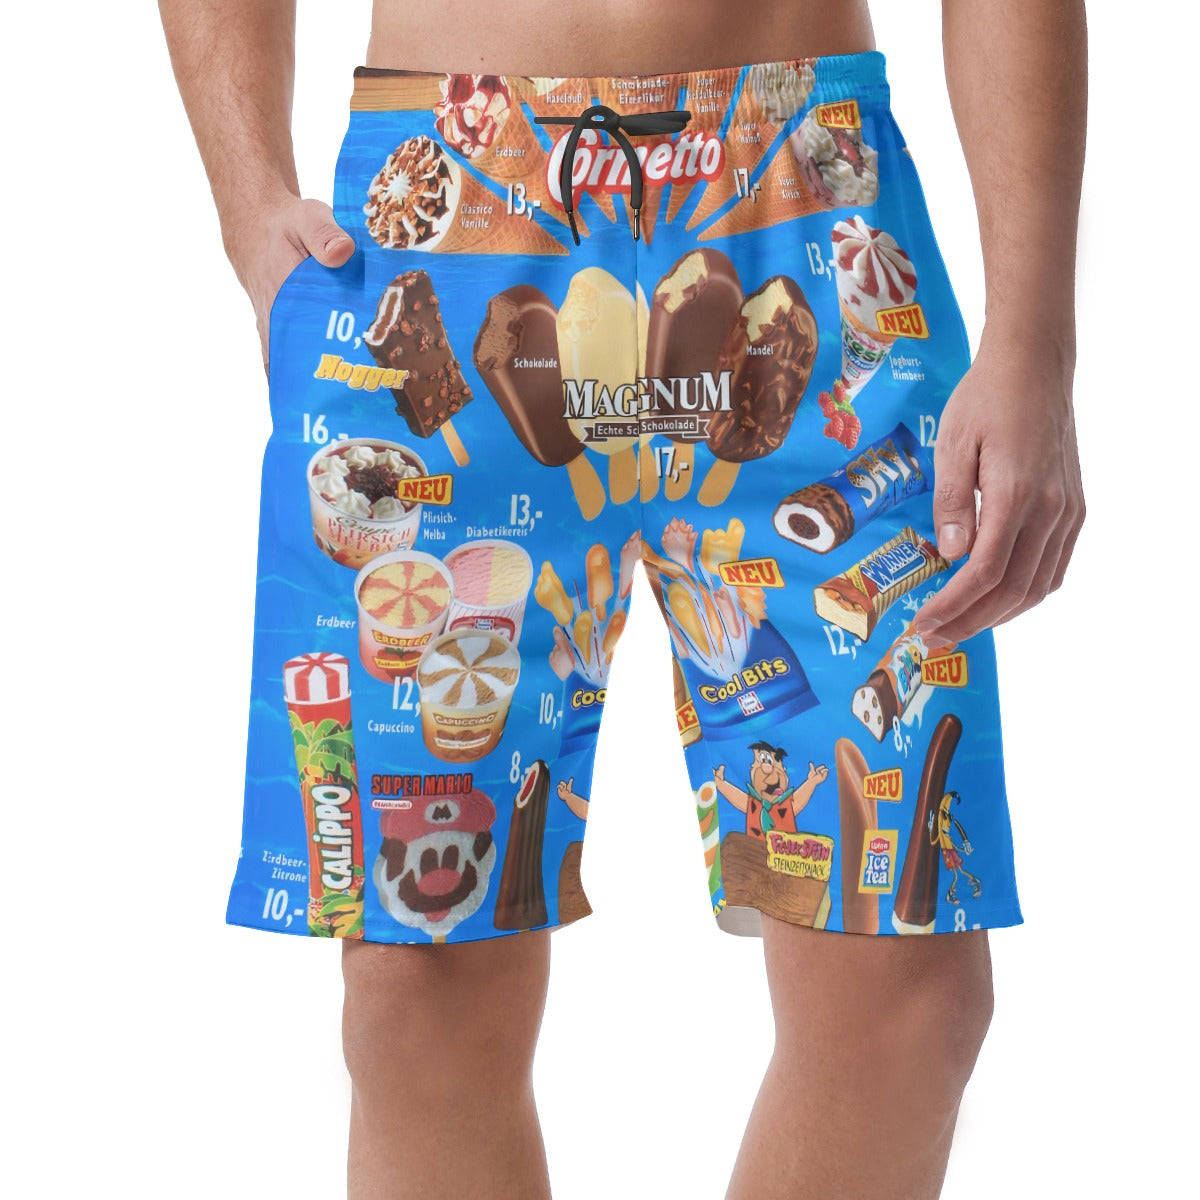 Detailed view of the fabric and print of Hawaiian shorts